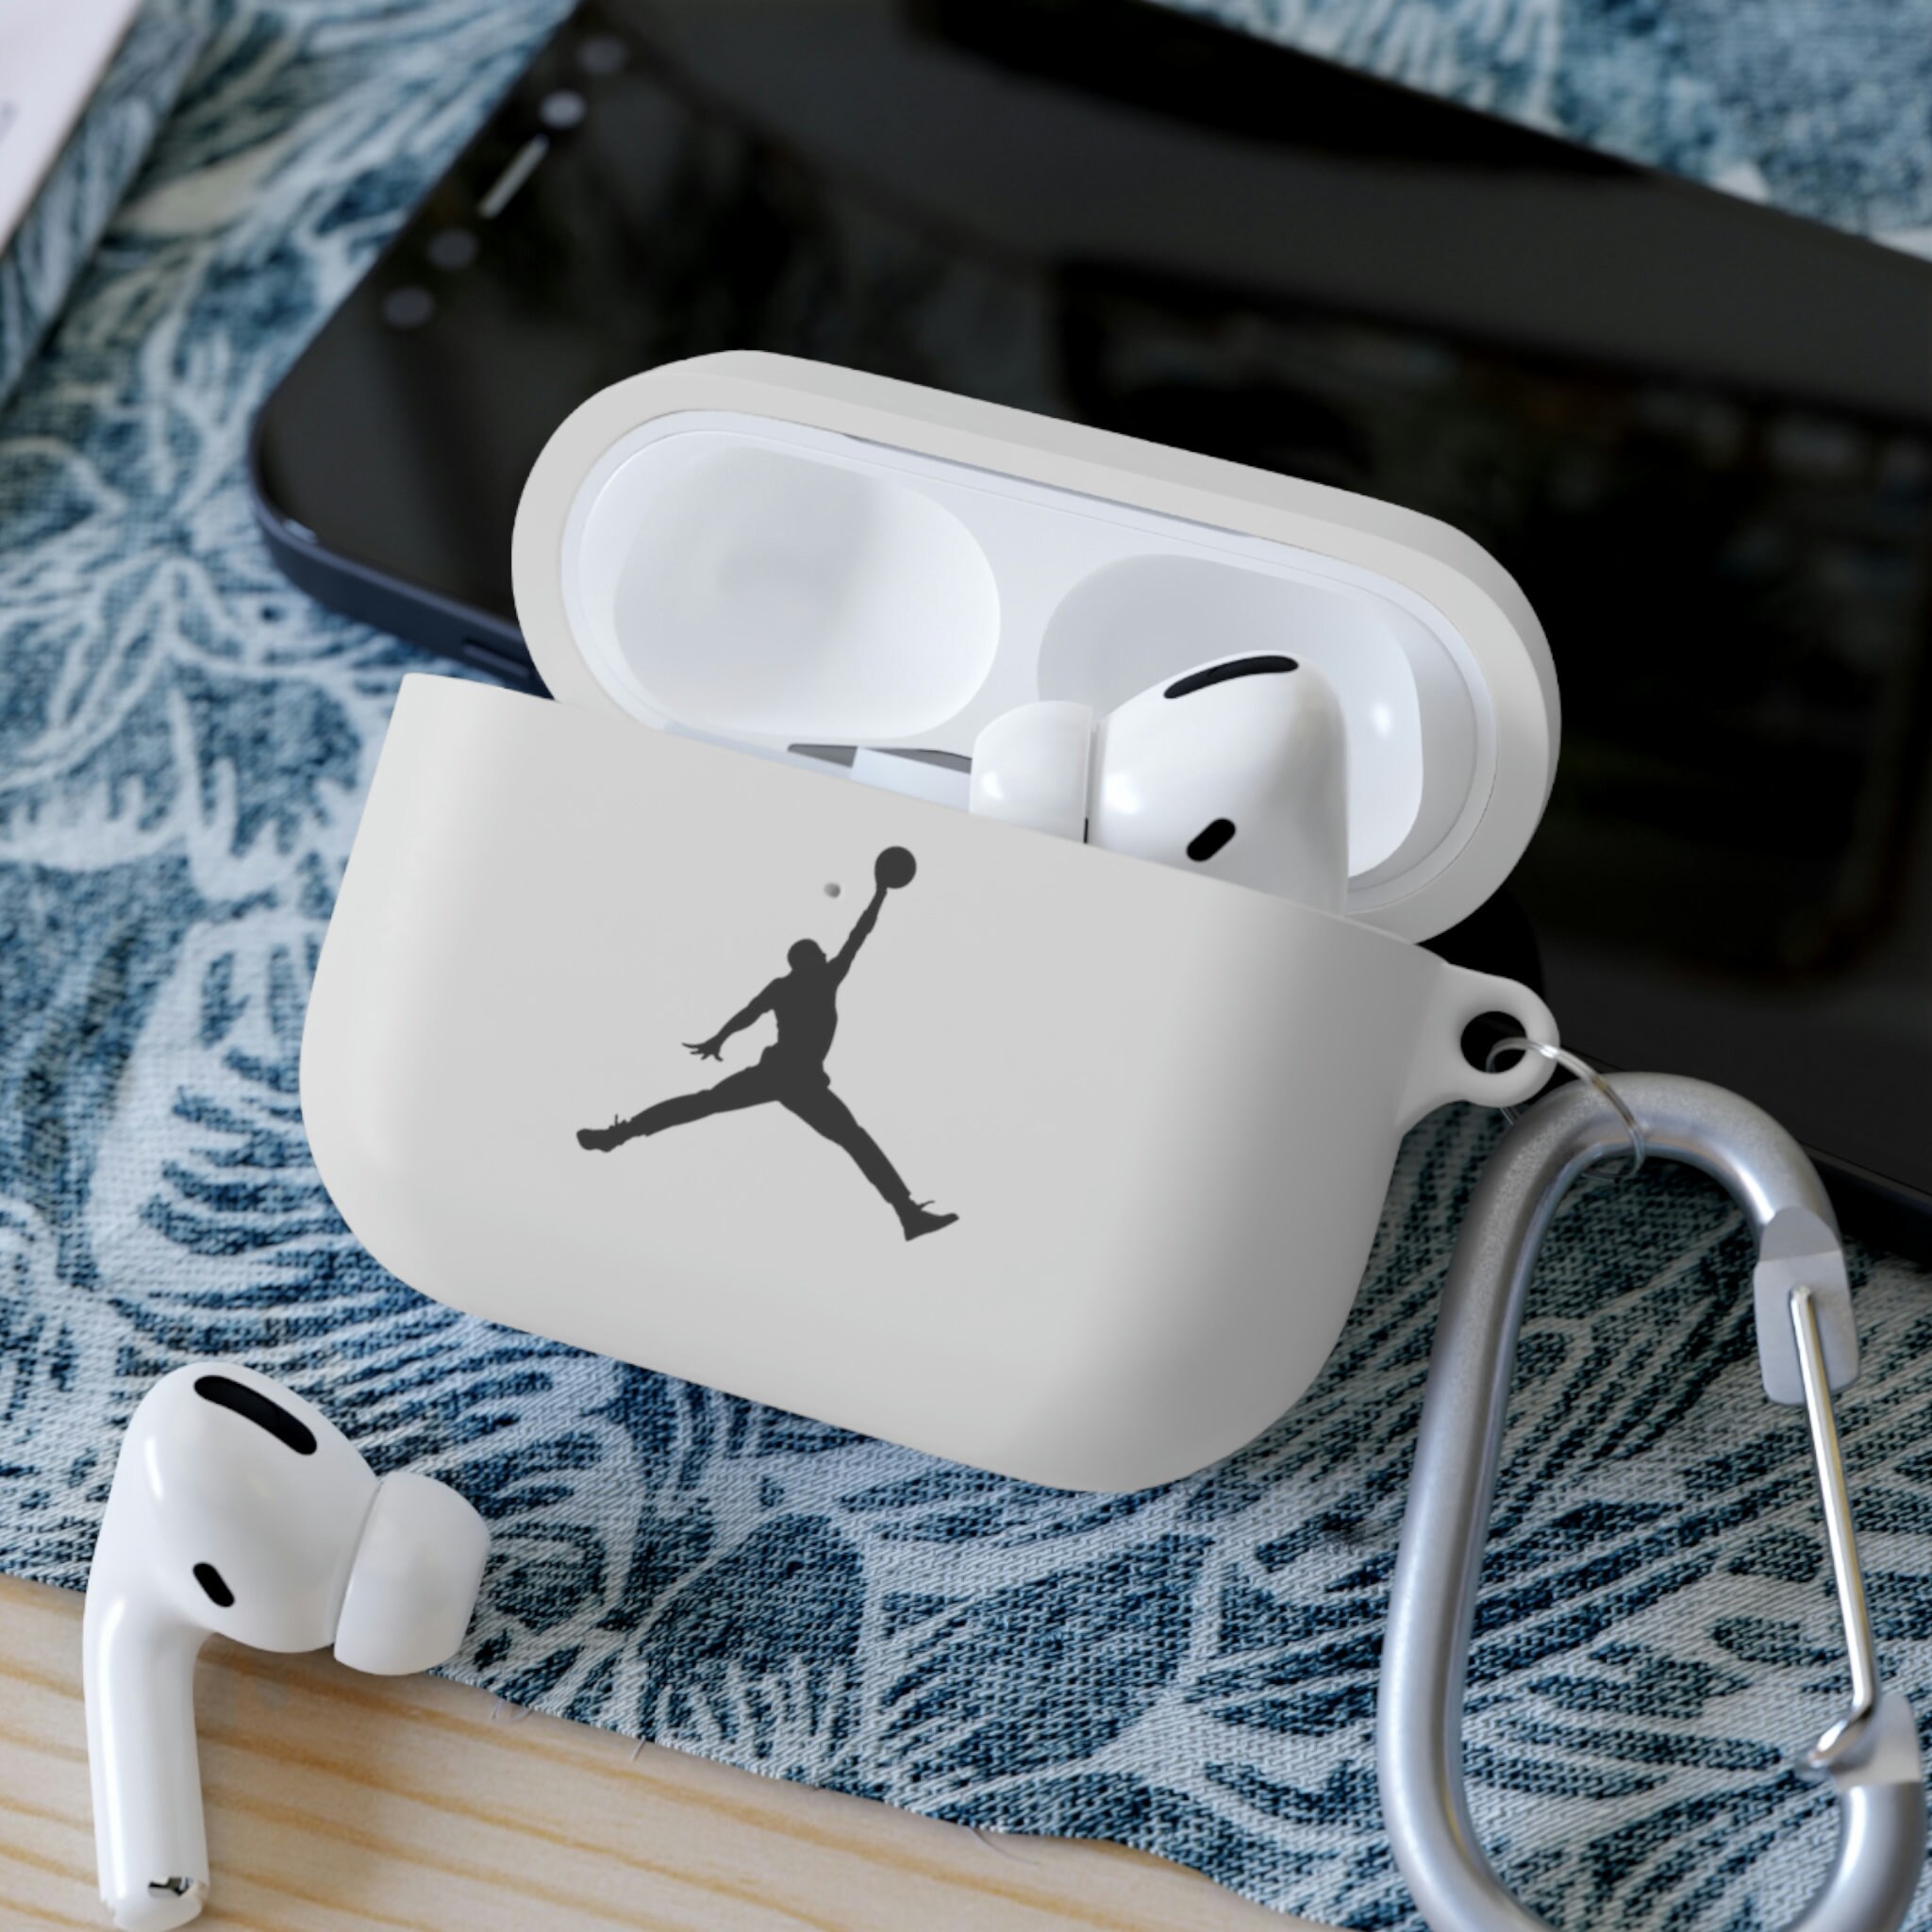 Nike Airpods Etsy